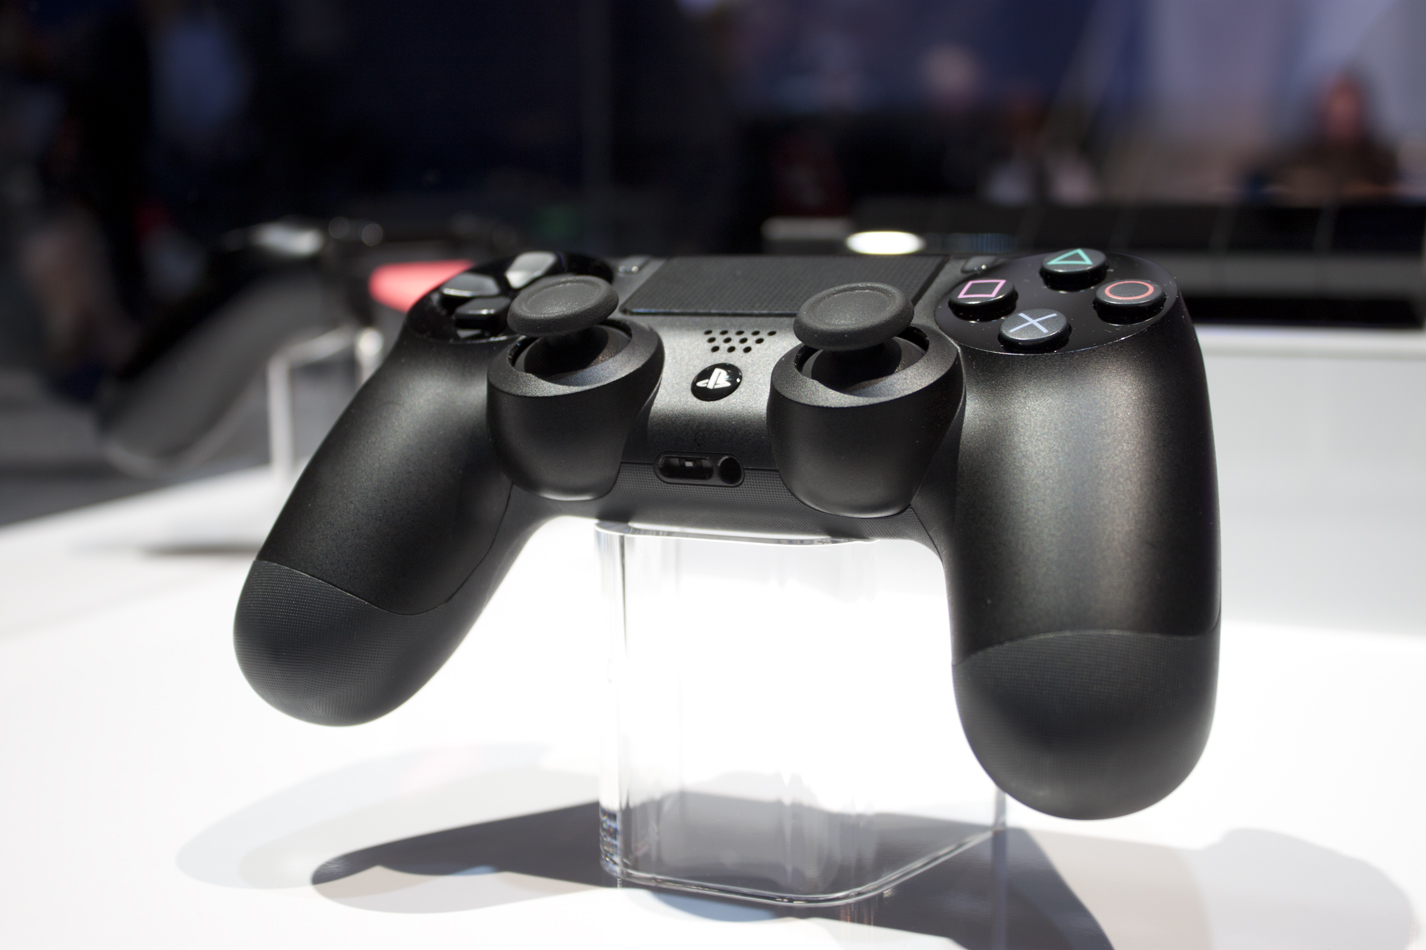 Download Ps3 Controller Driver For Mac